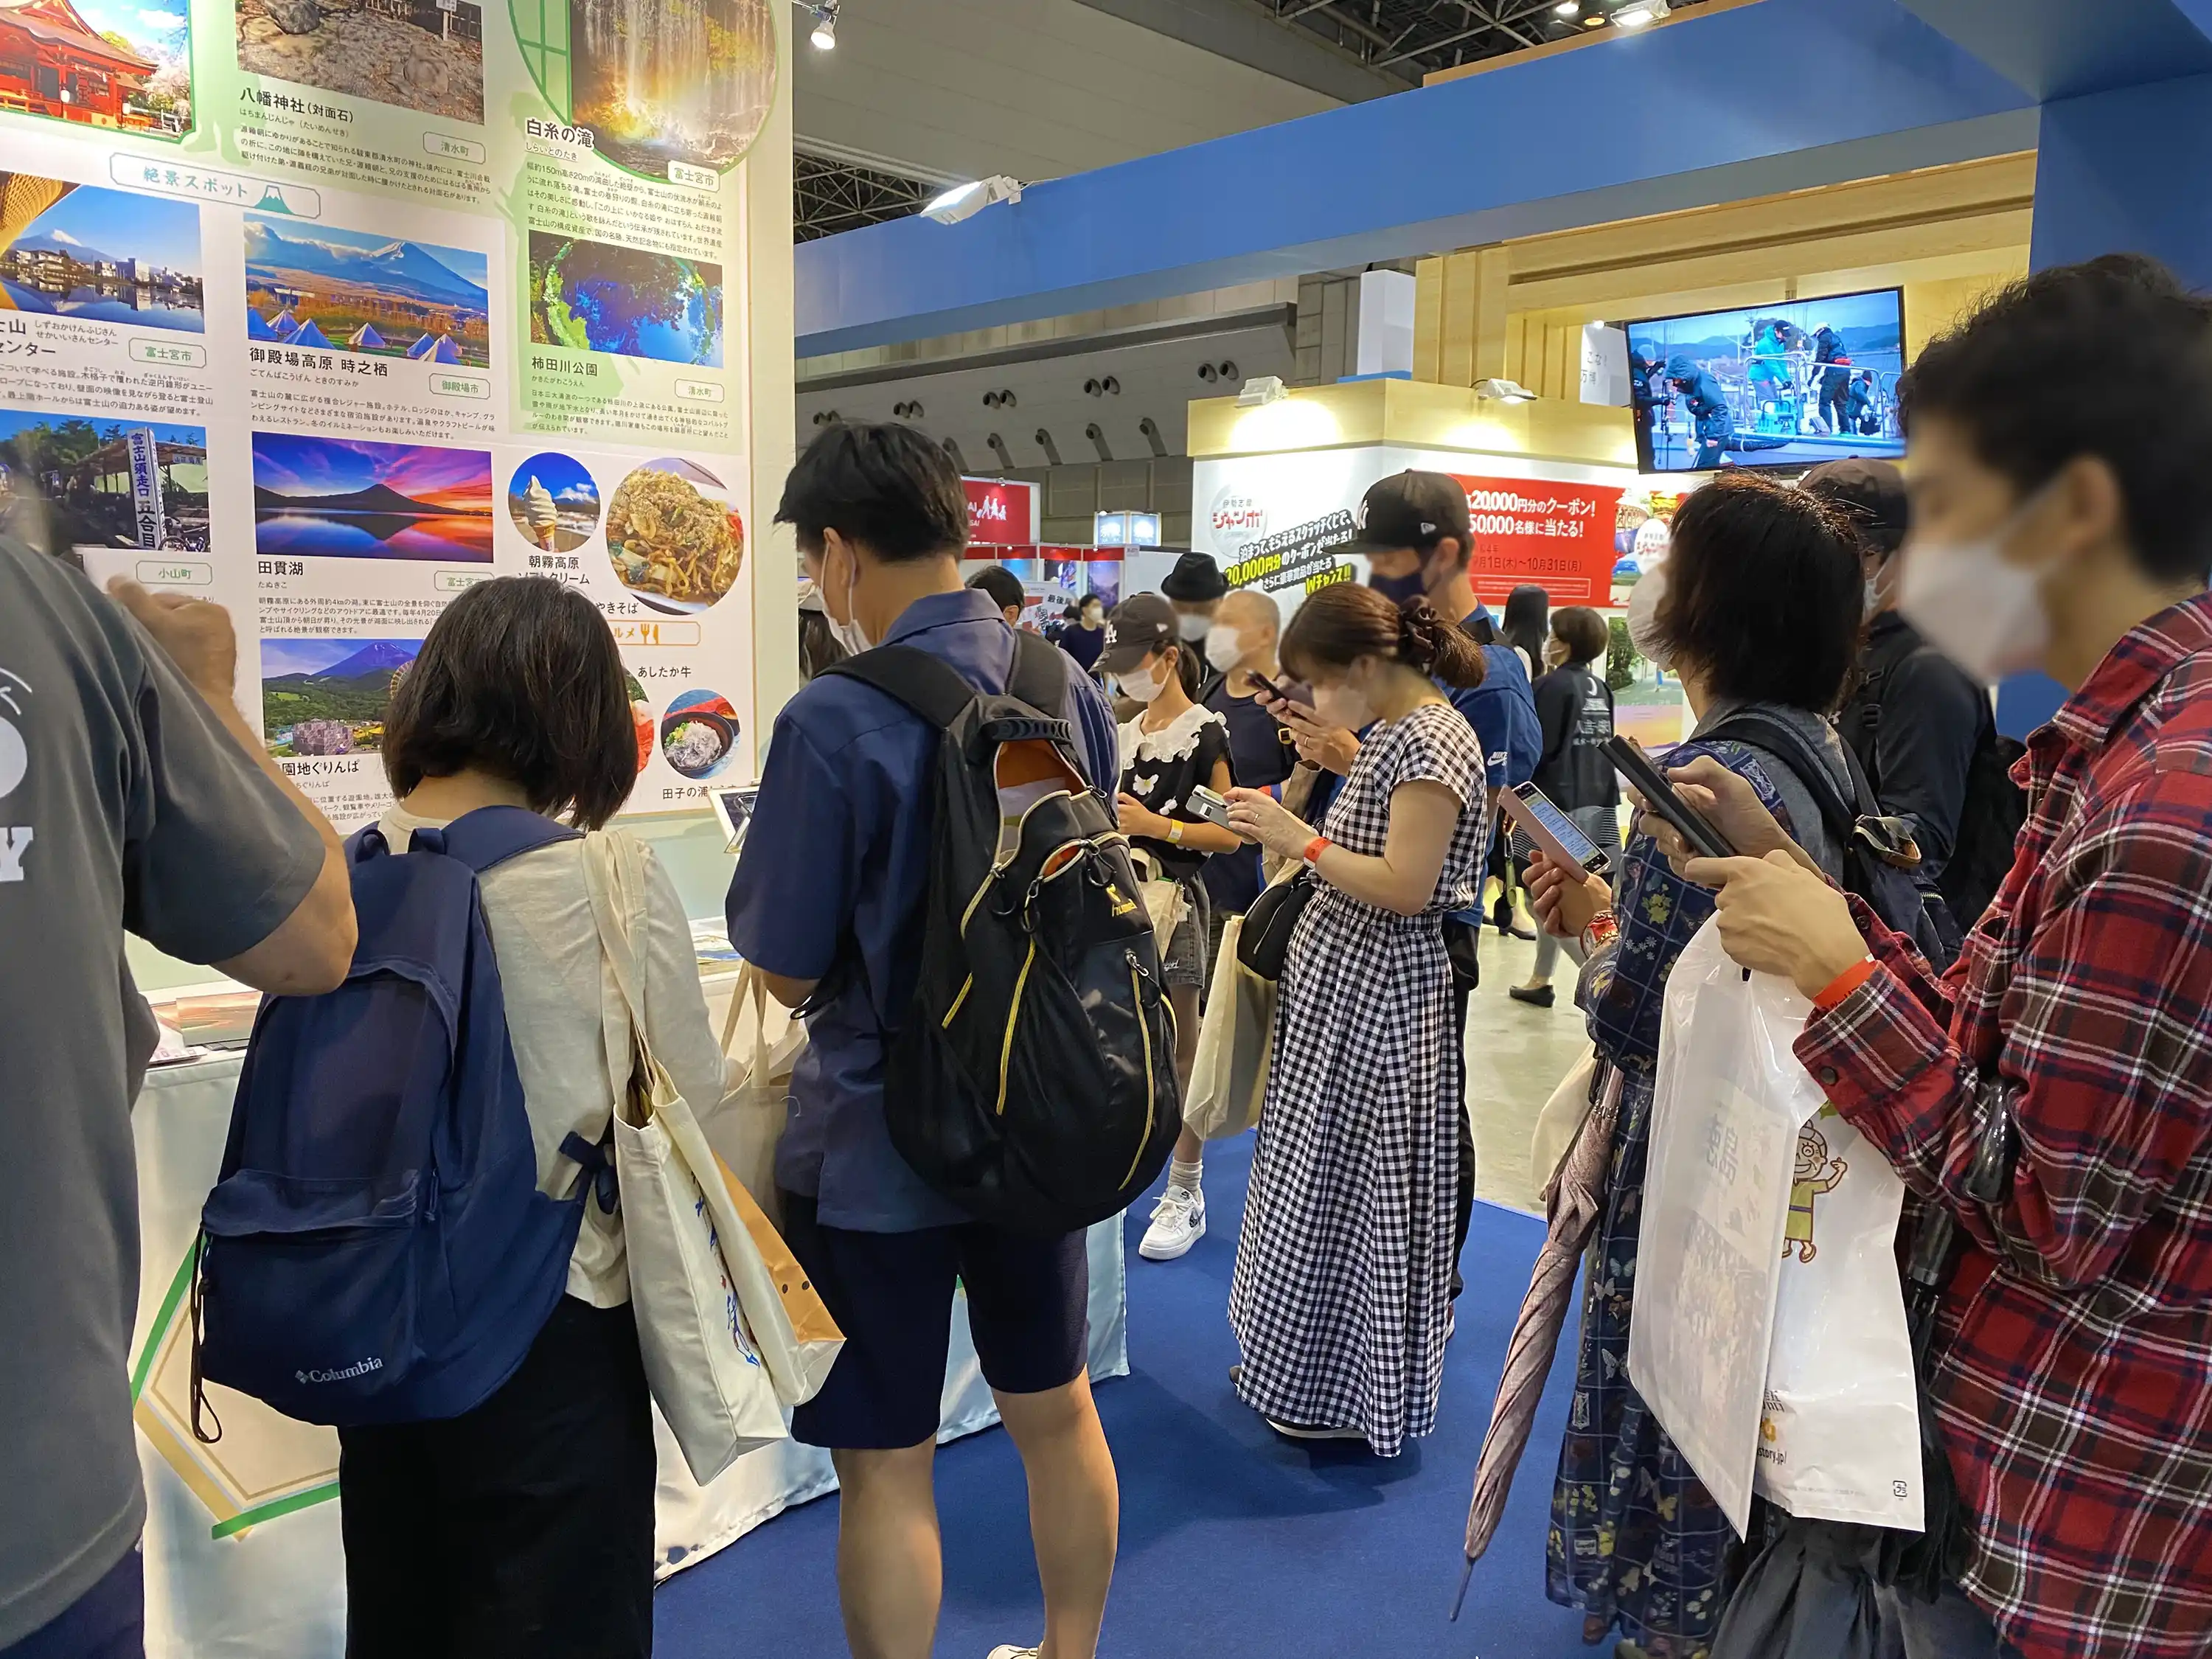 The Shizuoka Prefecture booth and the many visitors playing the Visibby crossword puzzle.